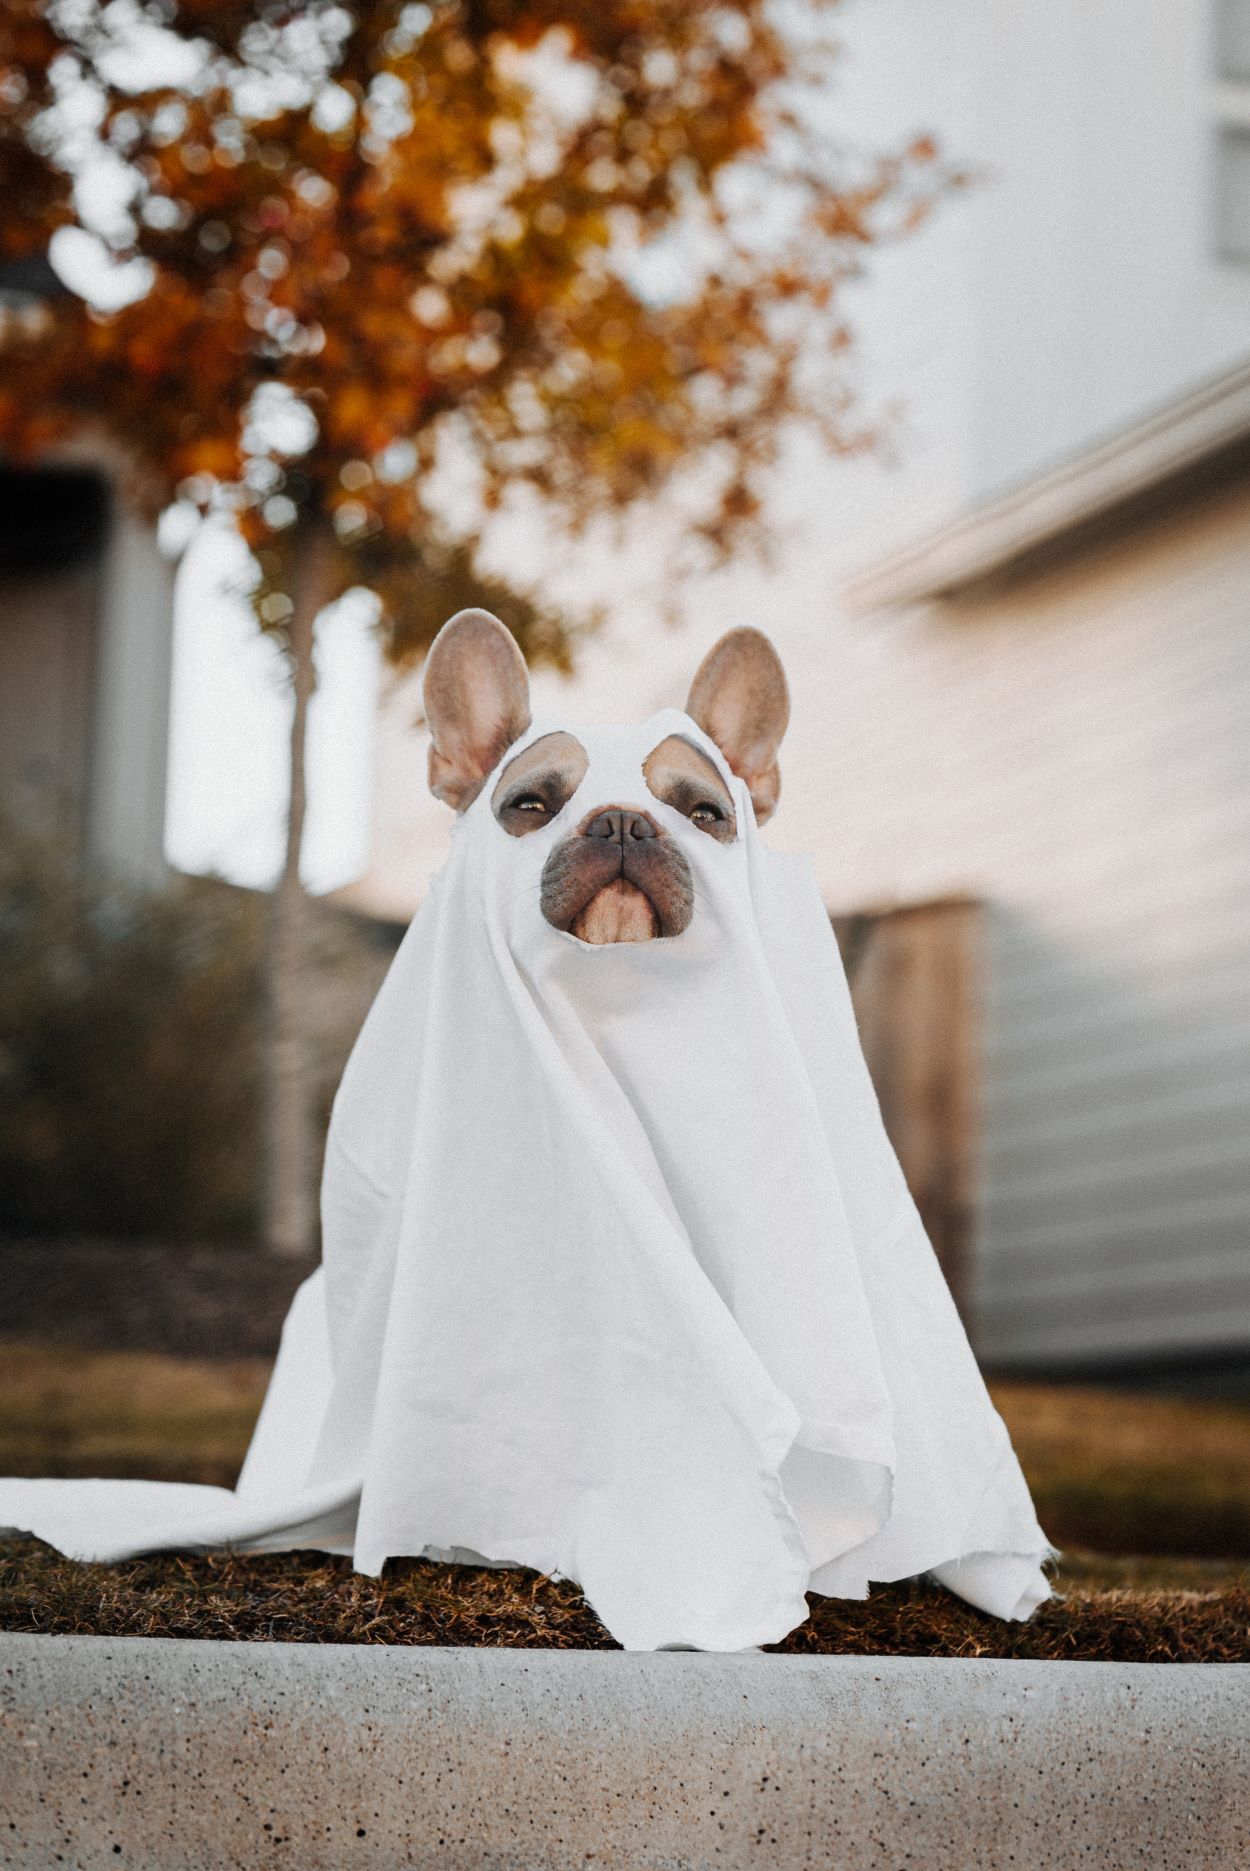 An image of a dog dressed up as a ghost.